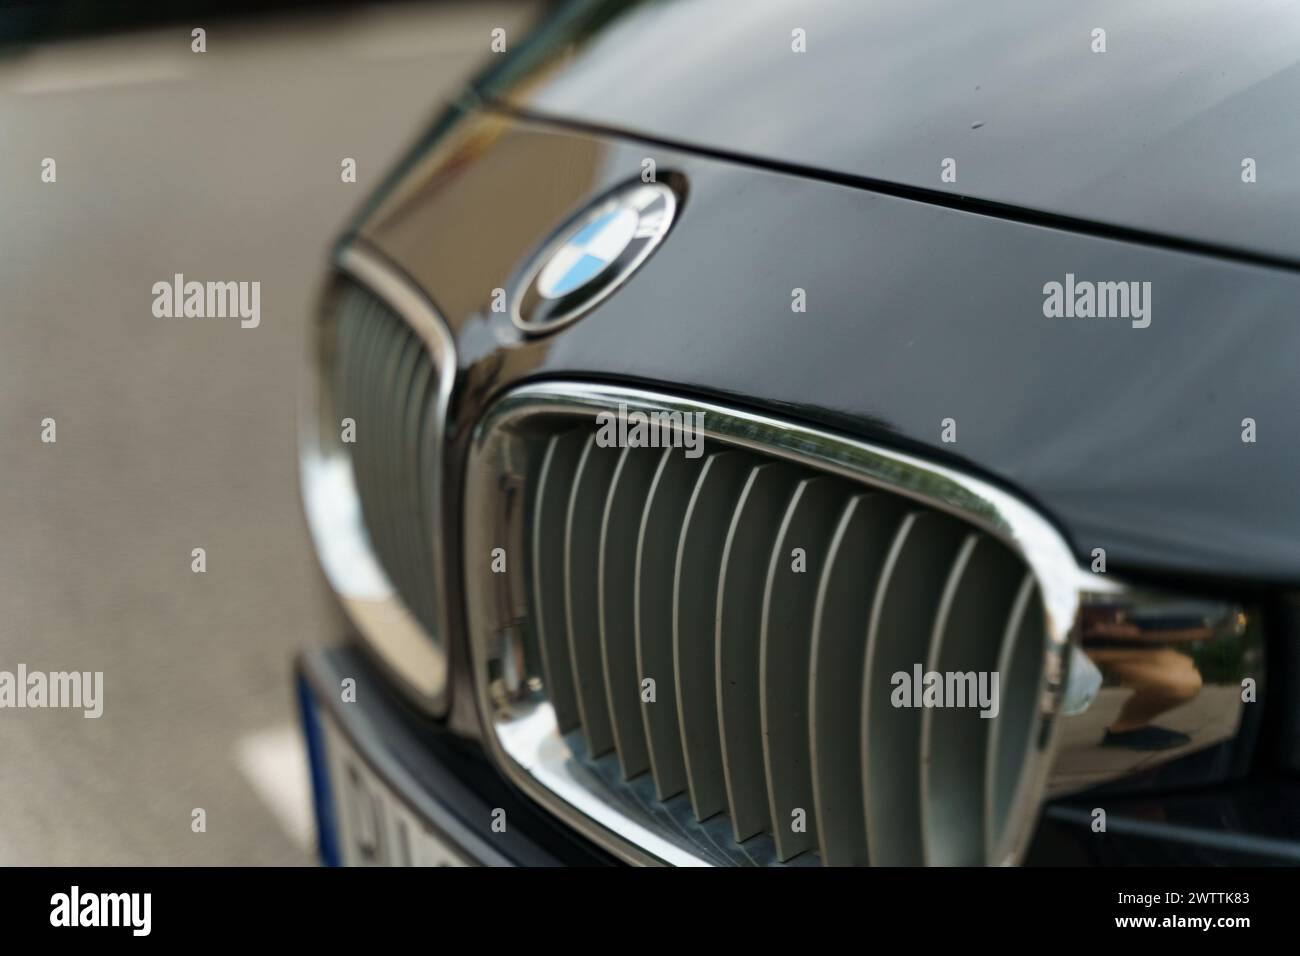 Warsaw, Poland - August 6, 2023: BMW logo on the hood of a black car. Selective sharpening. Stock Photo